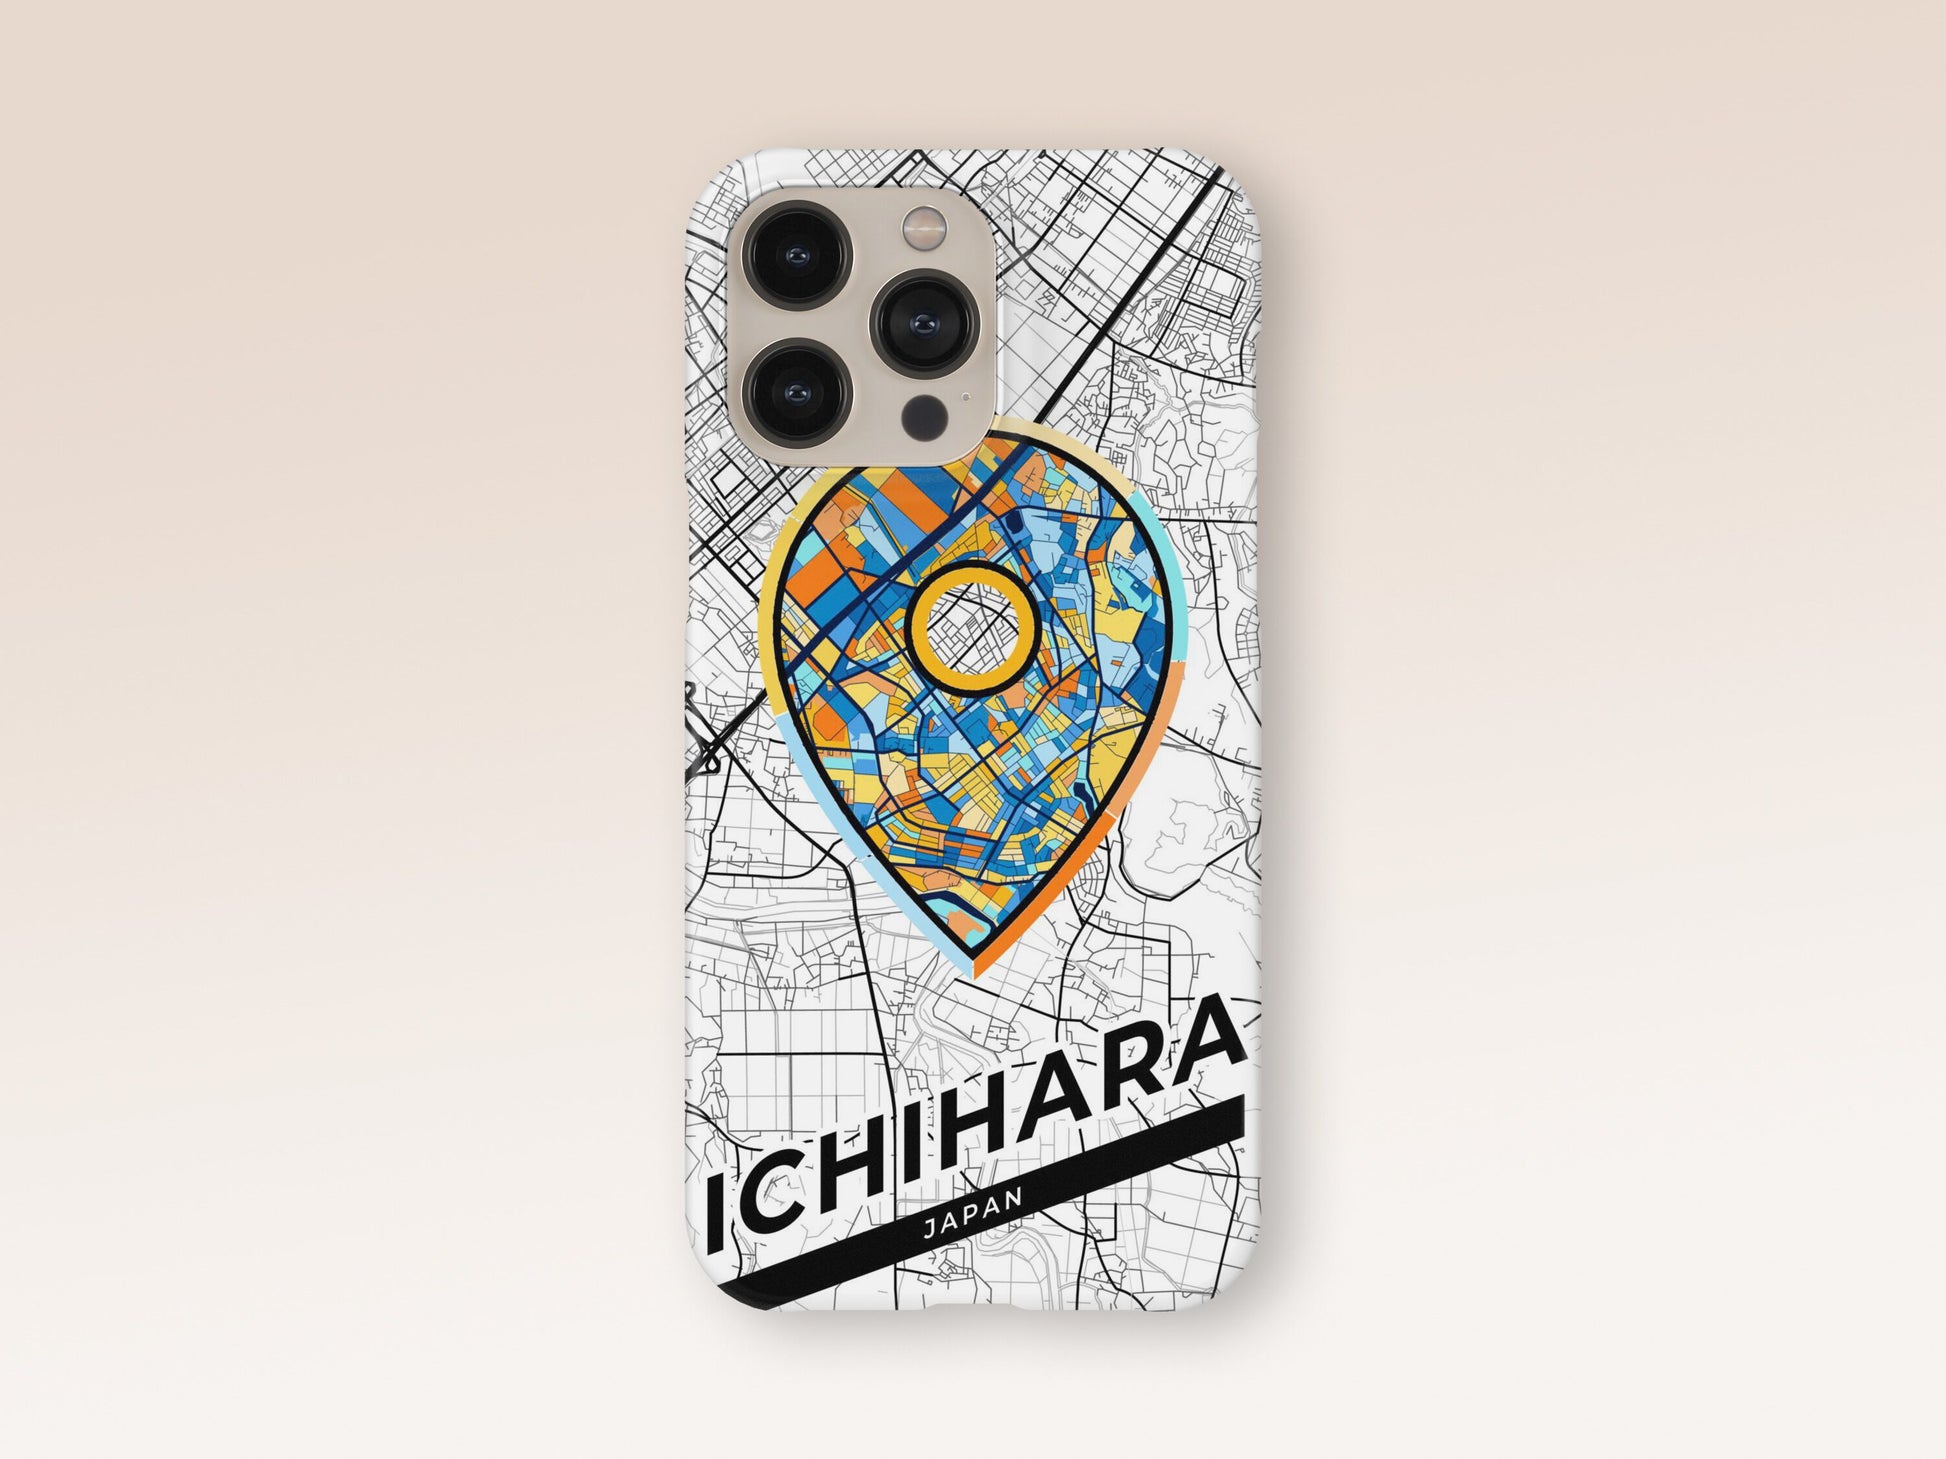 Ichihara Japan slim phone case with colorful icon. Birthday, wedding or housewarming gift. Couple match cases. 1